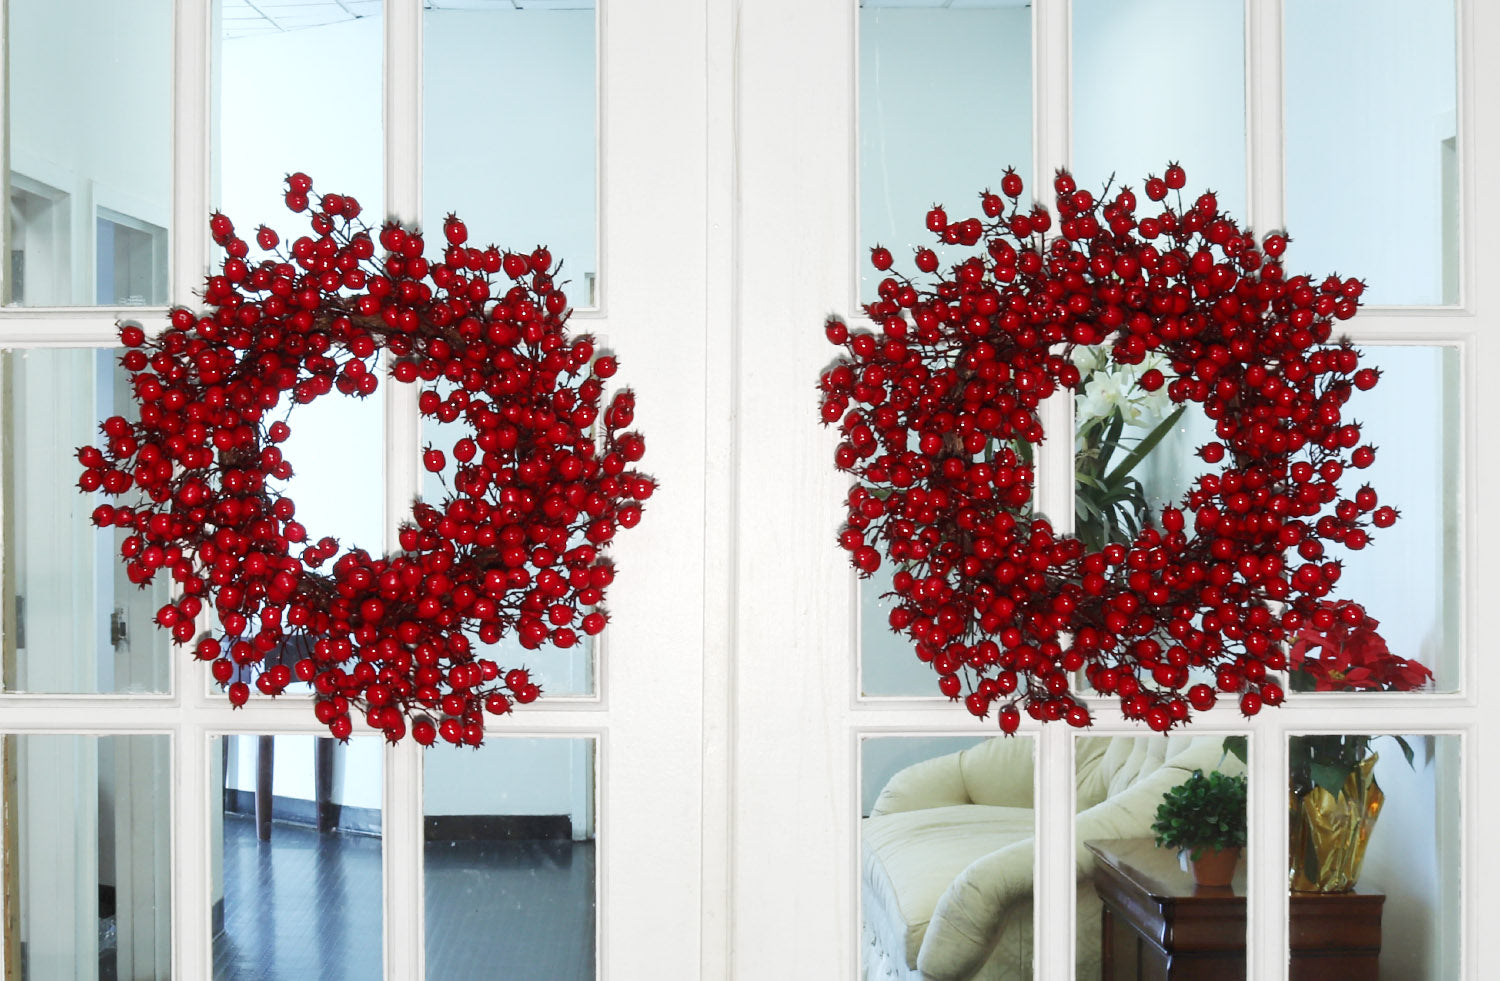 Red Hawthorn Berry Wreath - 22" Wide (Set of 2)